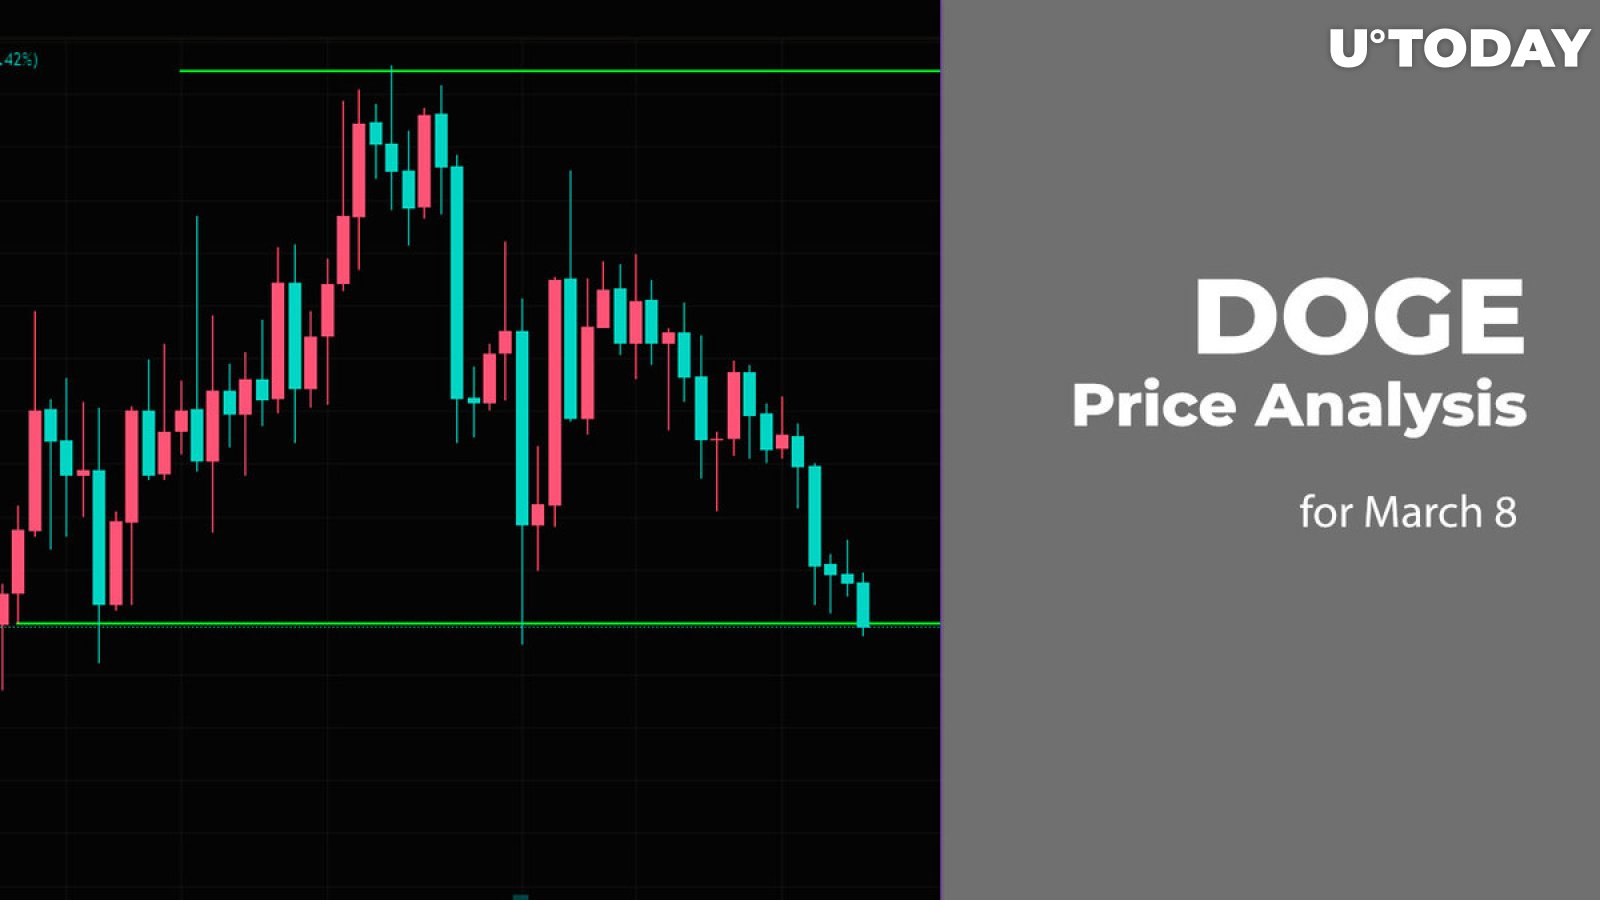 DOGE Price Analysis for March 8